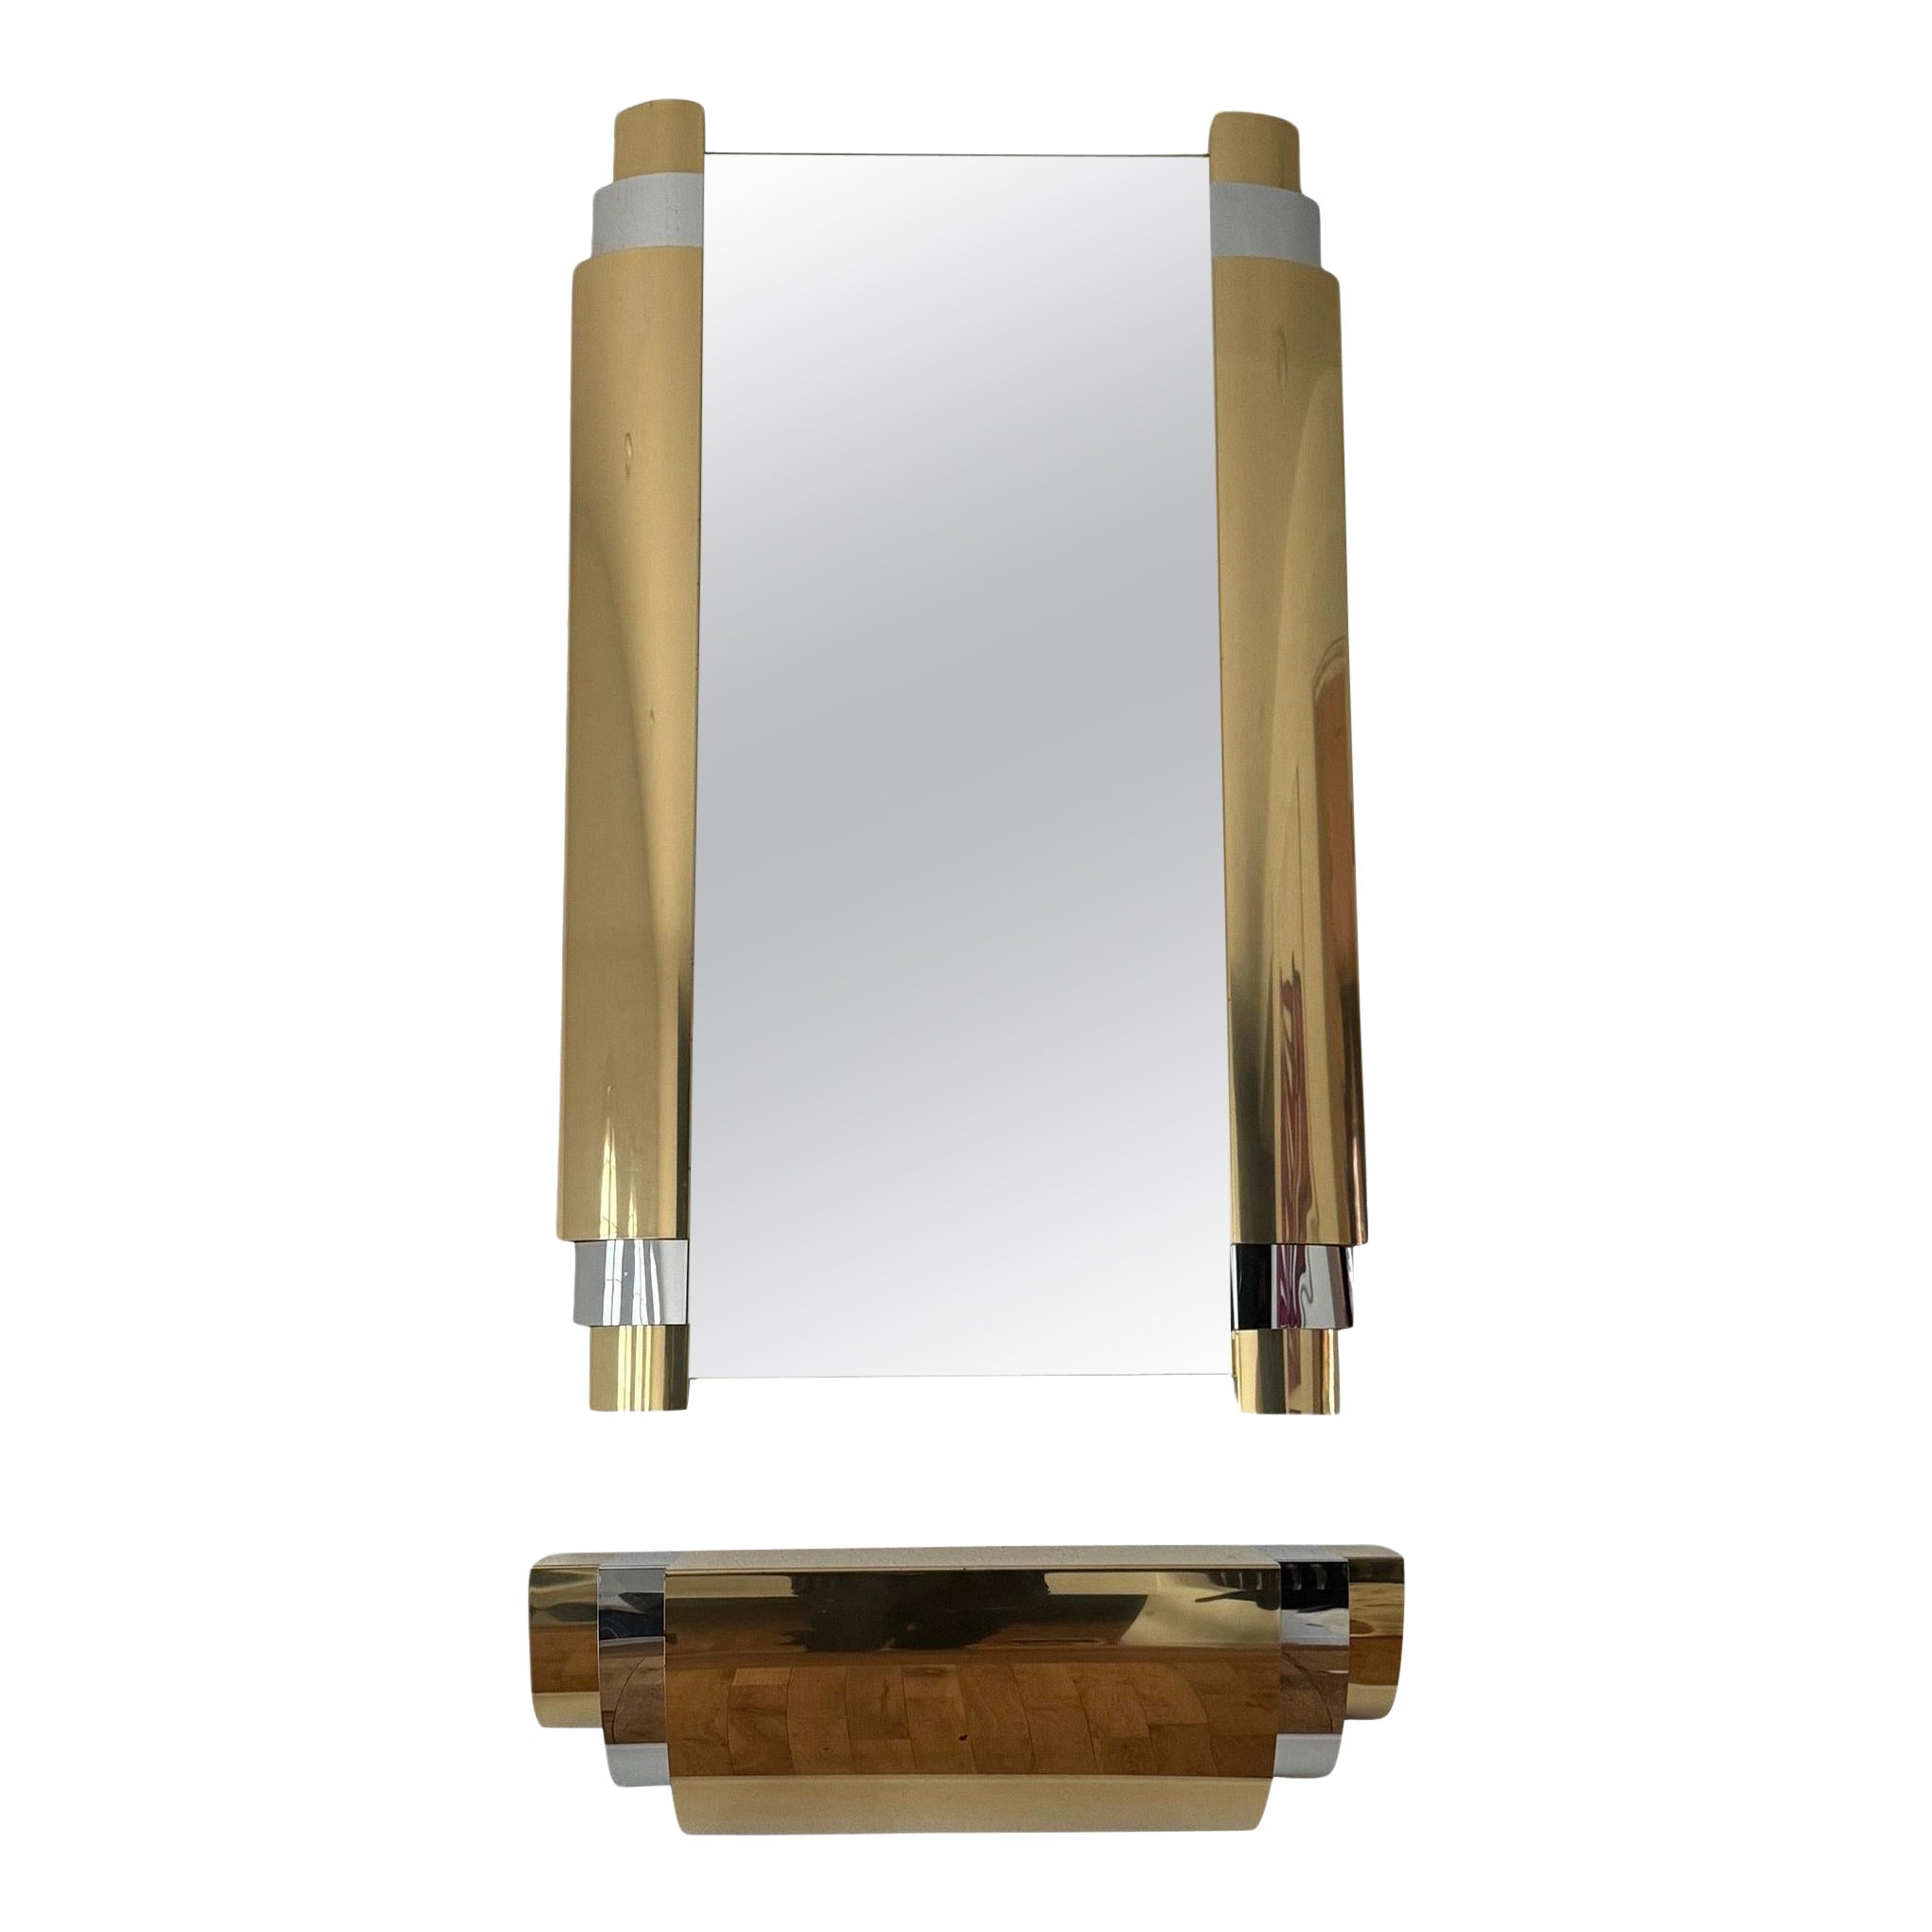 1980s Curtis Jere Brass and Chrome Wall Mounted Mirror With Floating Shelf